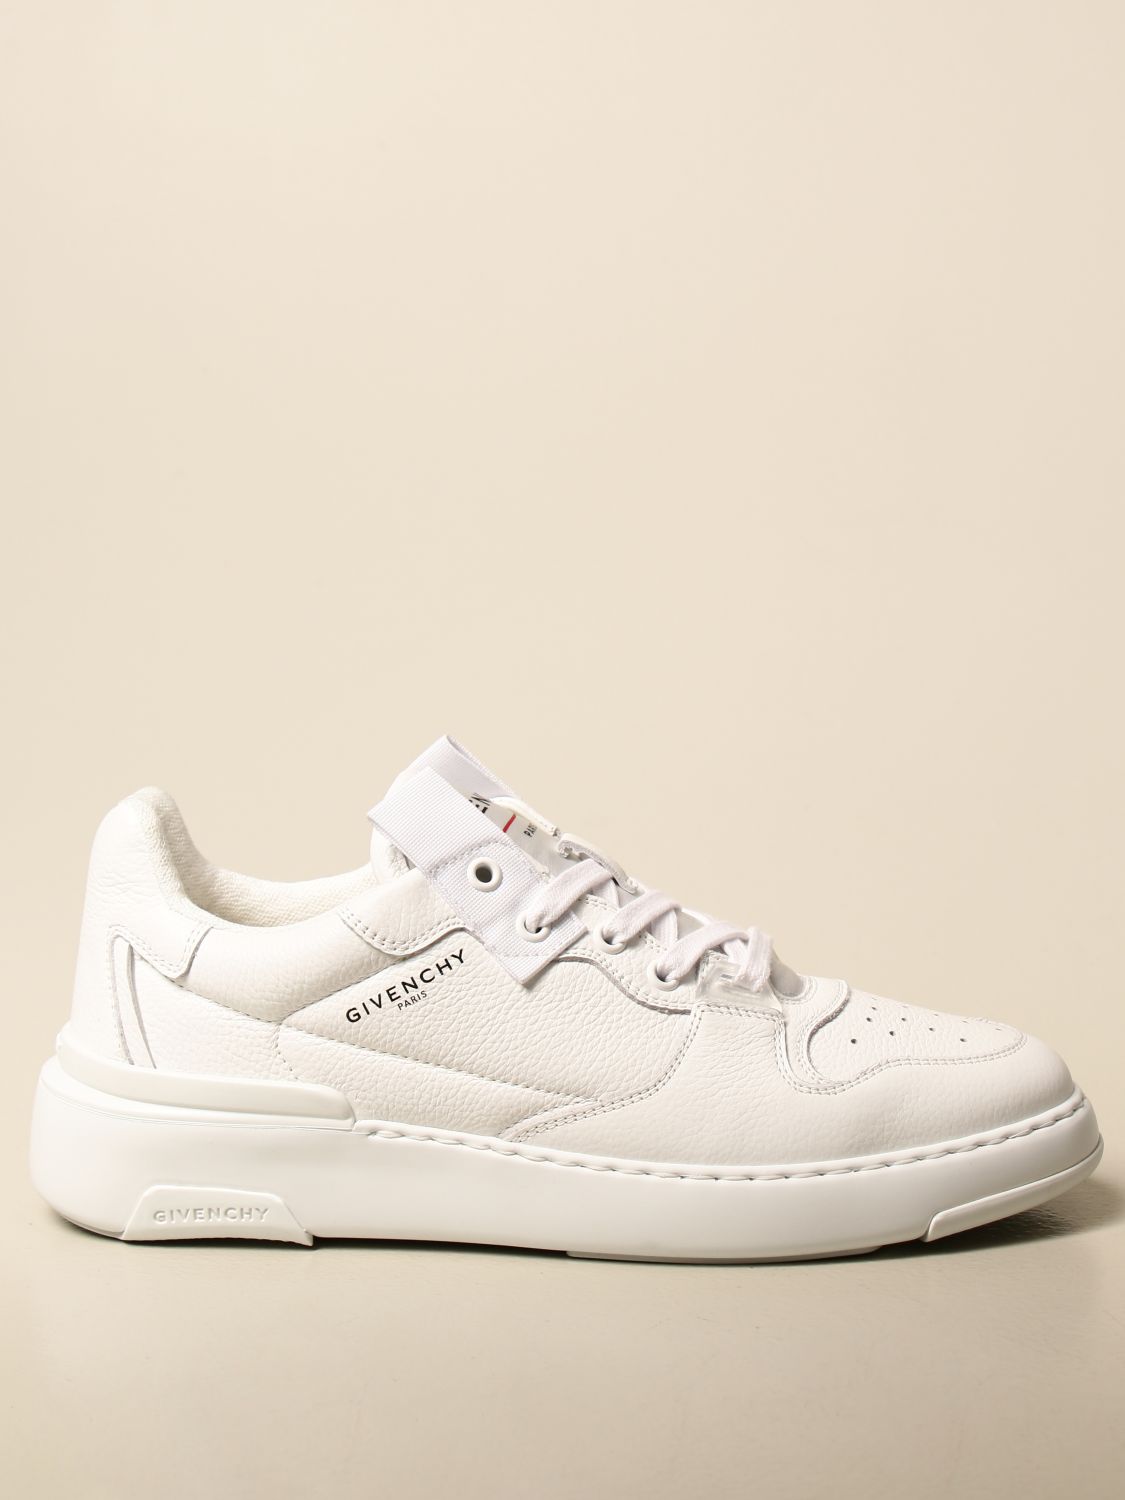 Udrydde Fedt Hyret Givenchy Outlet: sneakers in leather with logo | Sneakers Givenchy Men  White | Sneakers Givenchy BH002KH0KP GIGLIO.COM